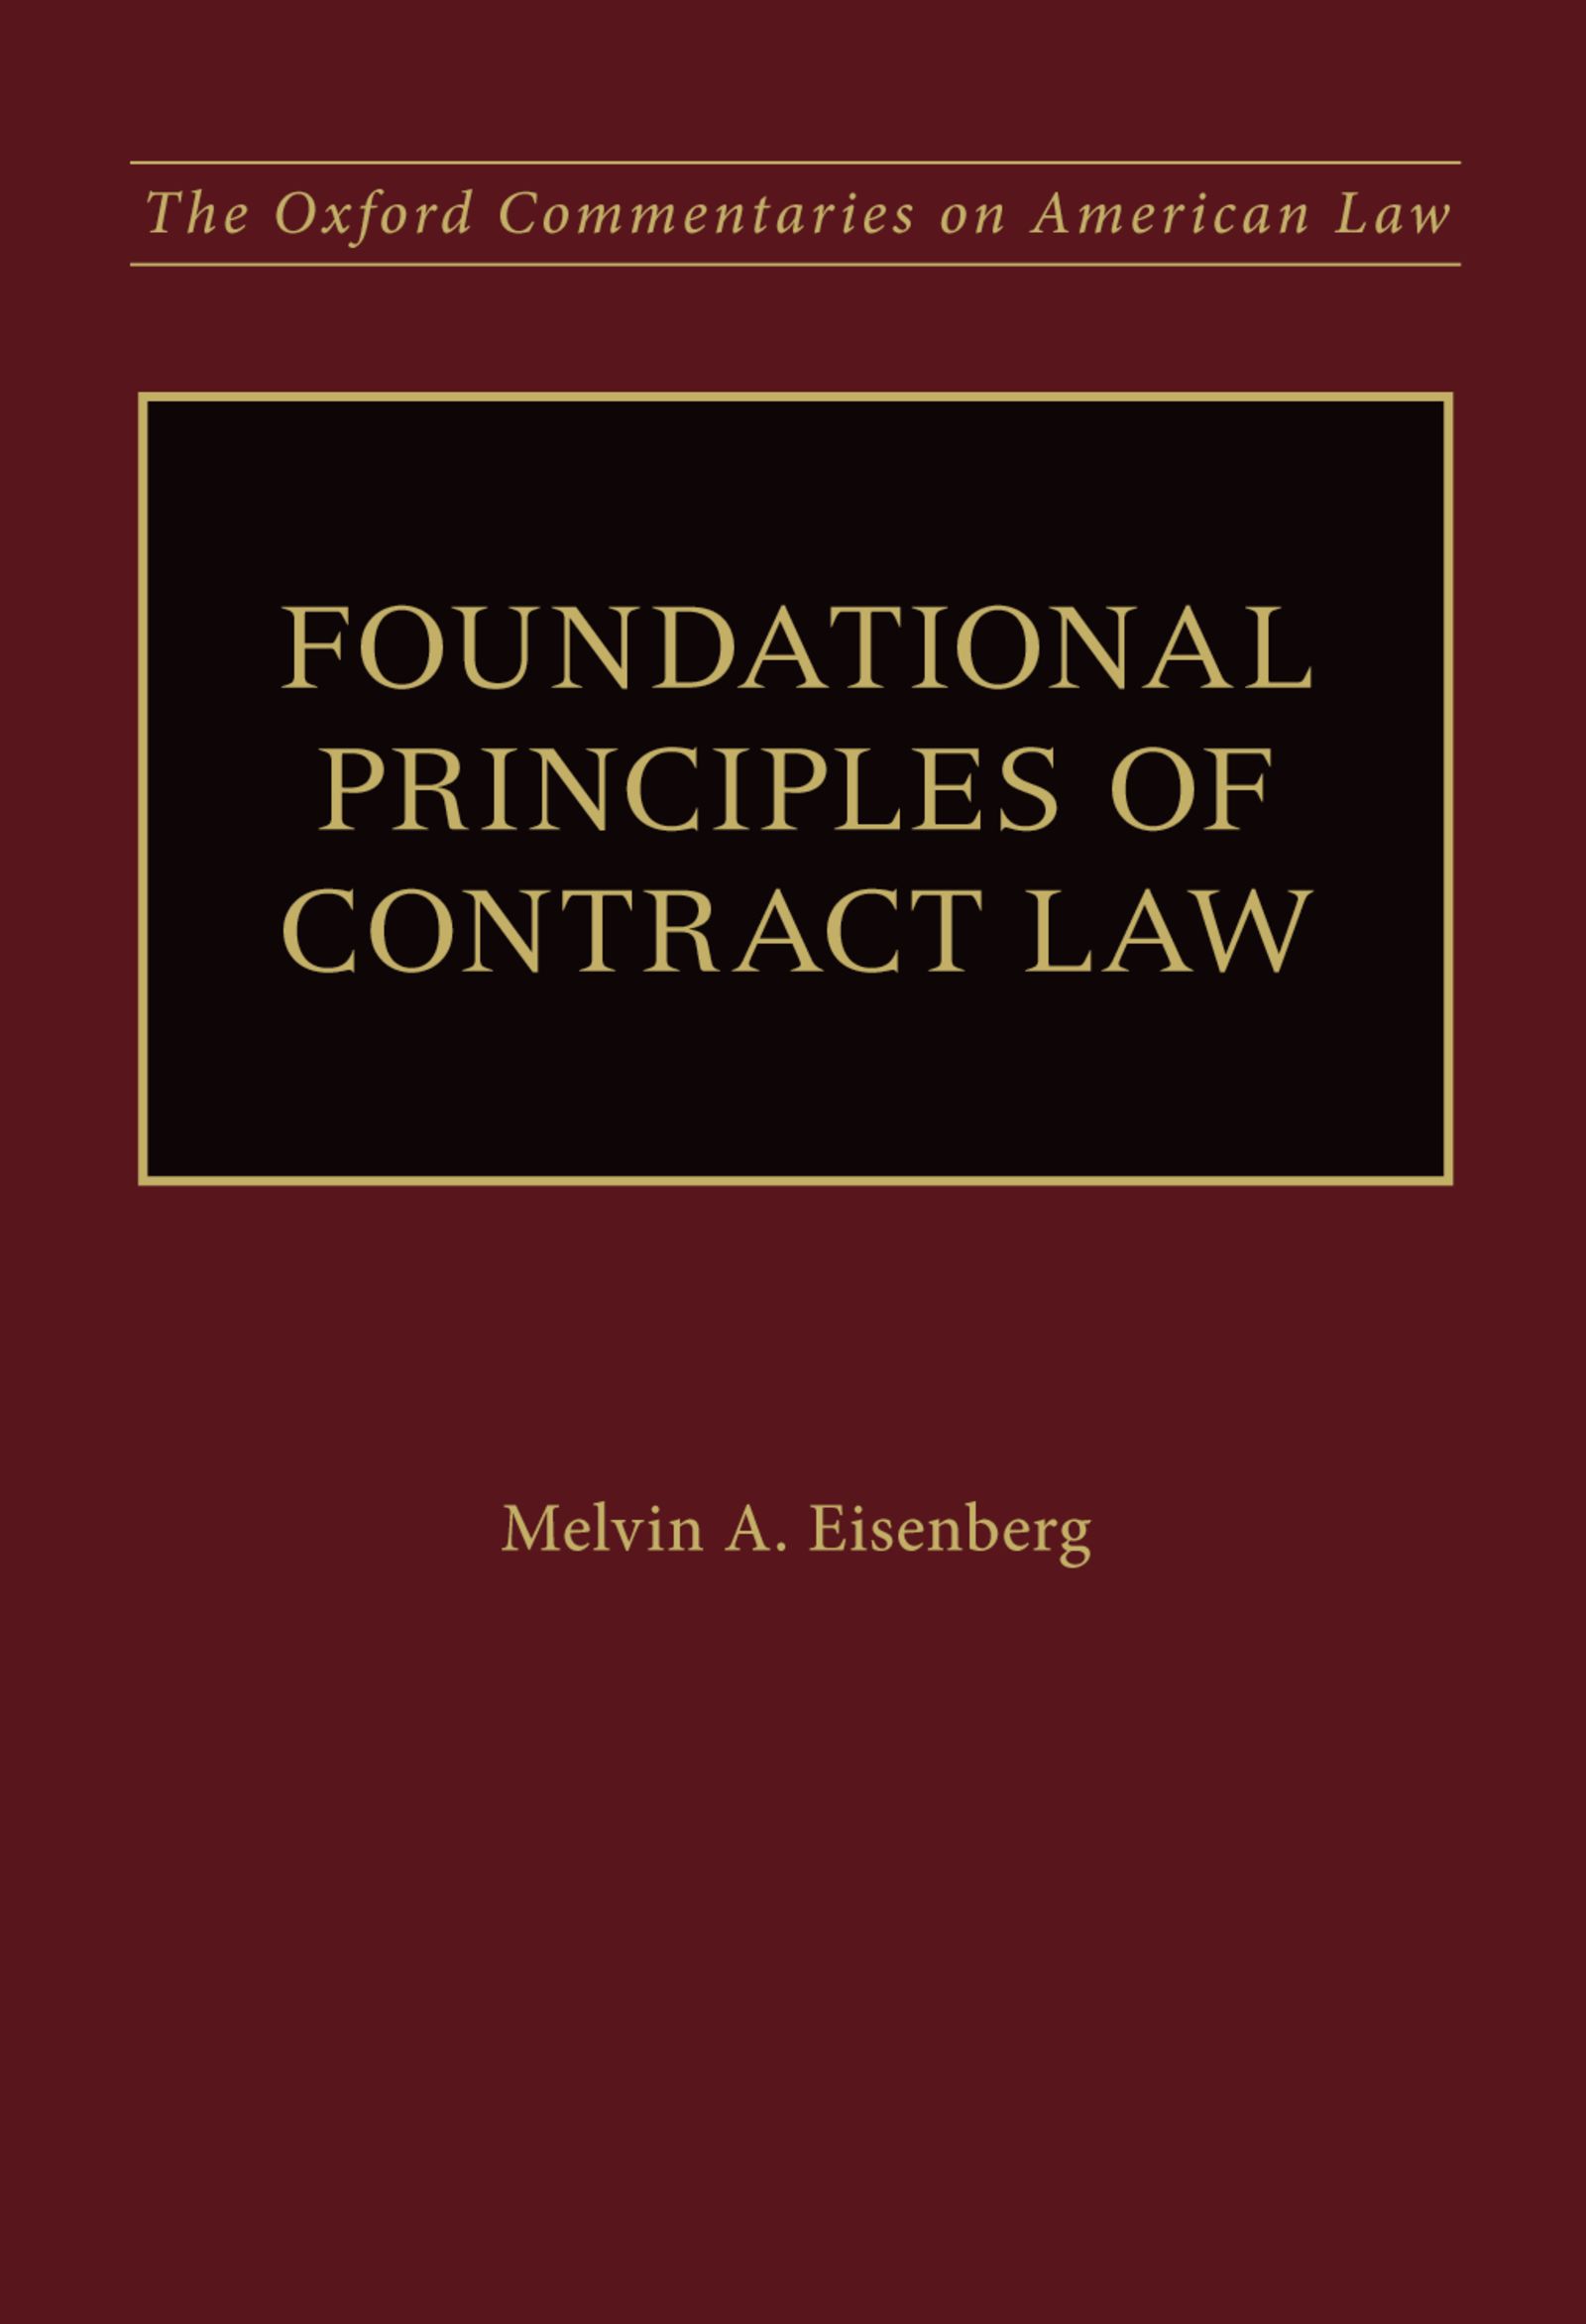 commentaries on european contract law